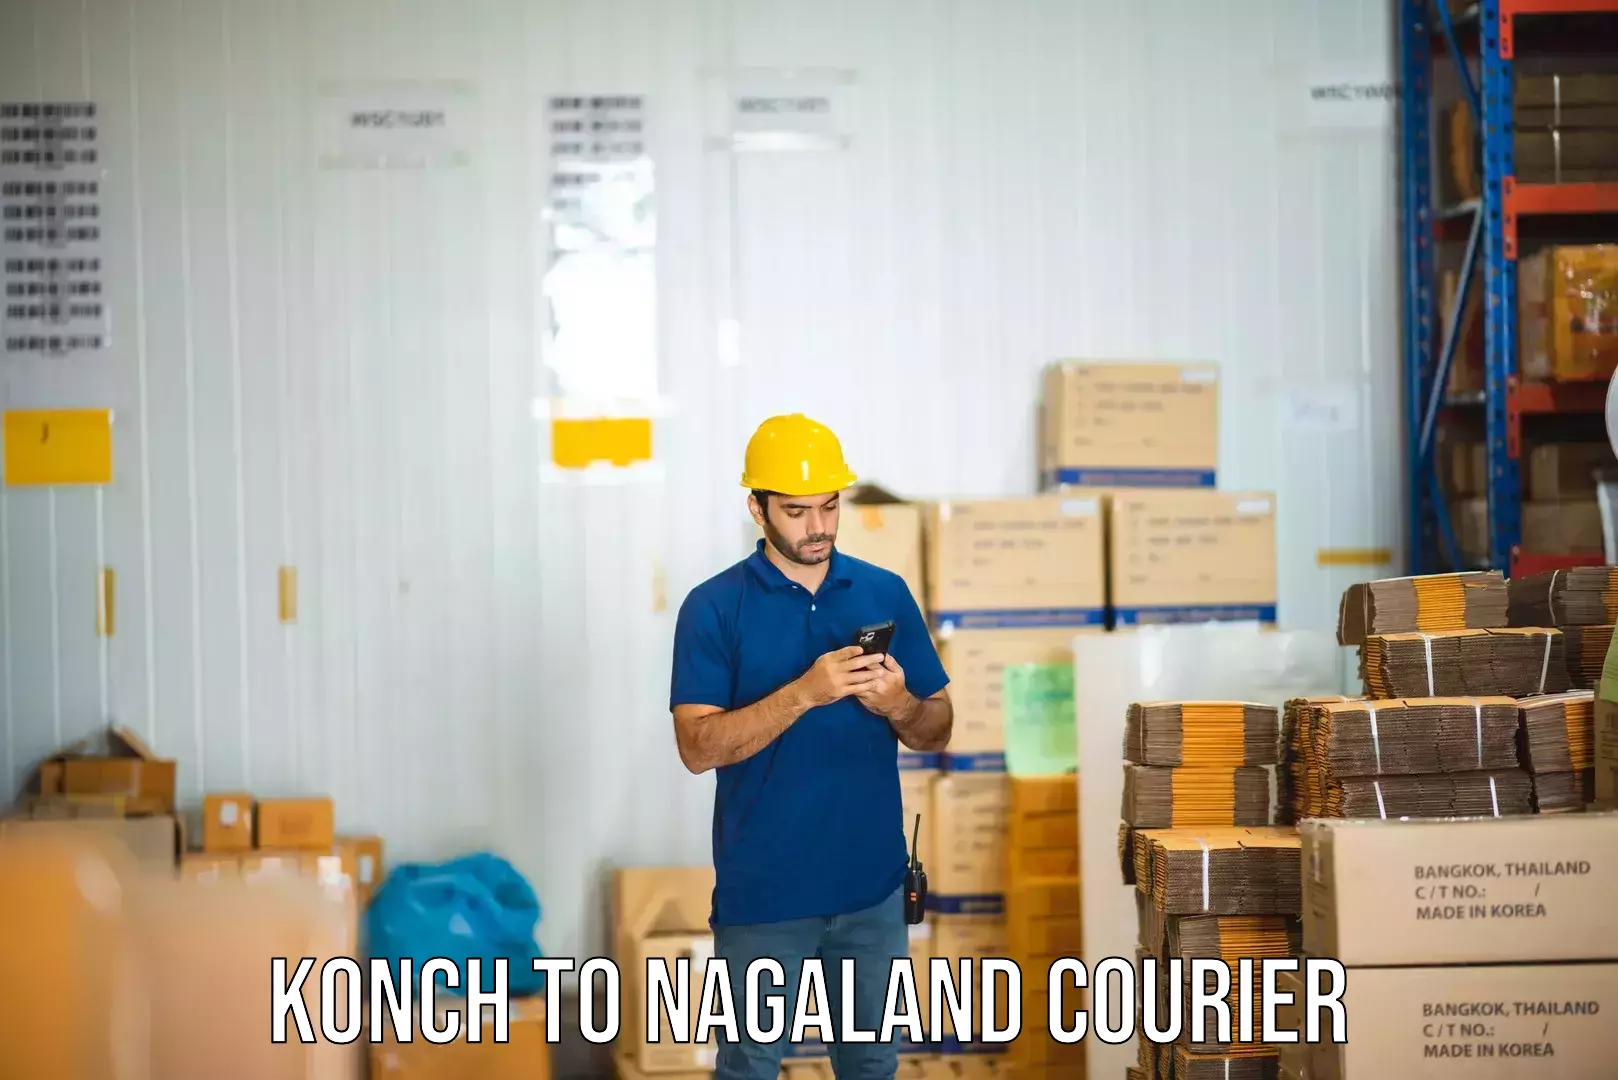 Global freight services Konch to Nagaland